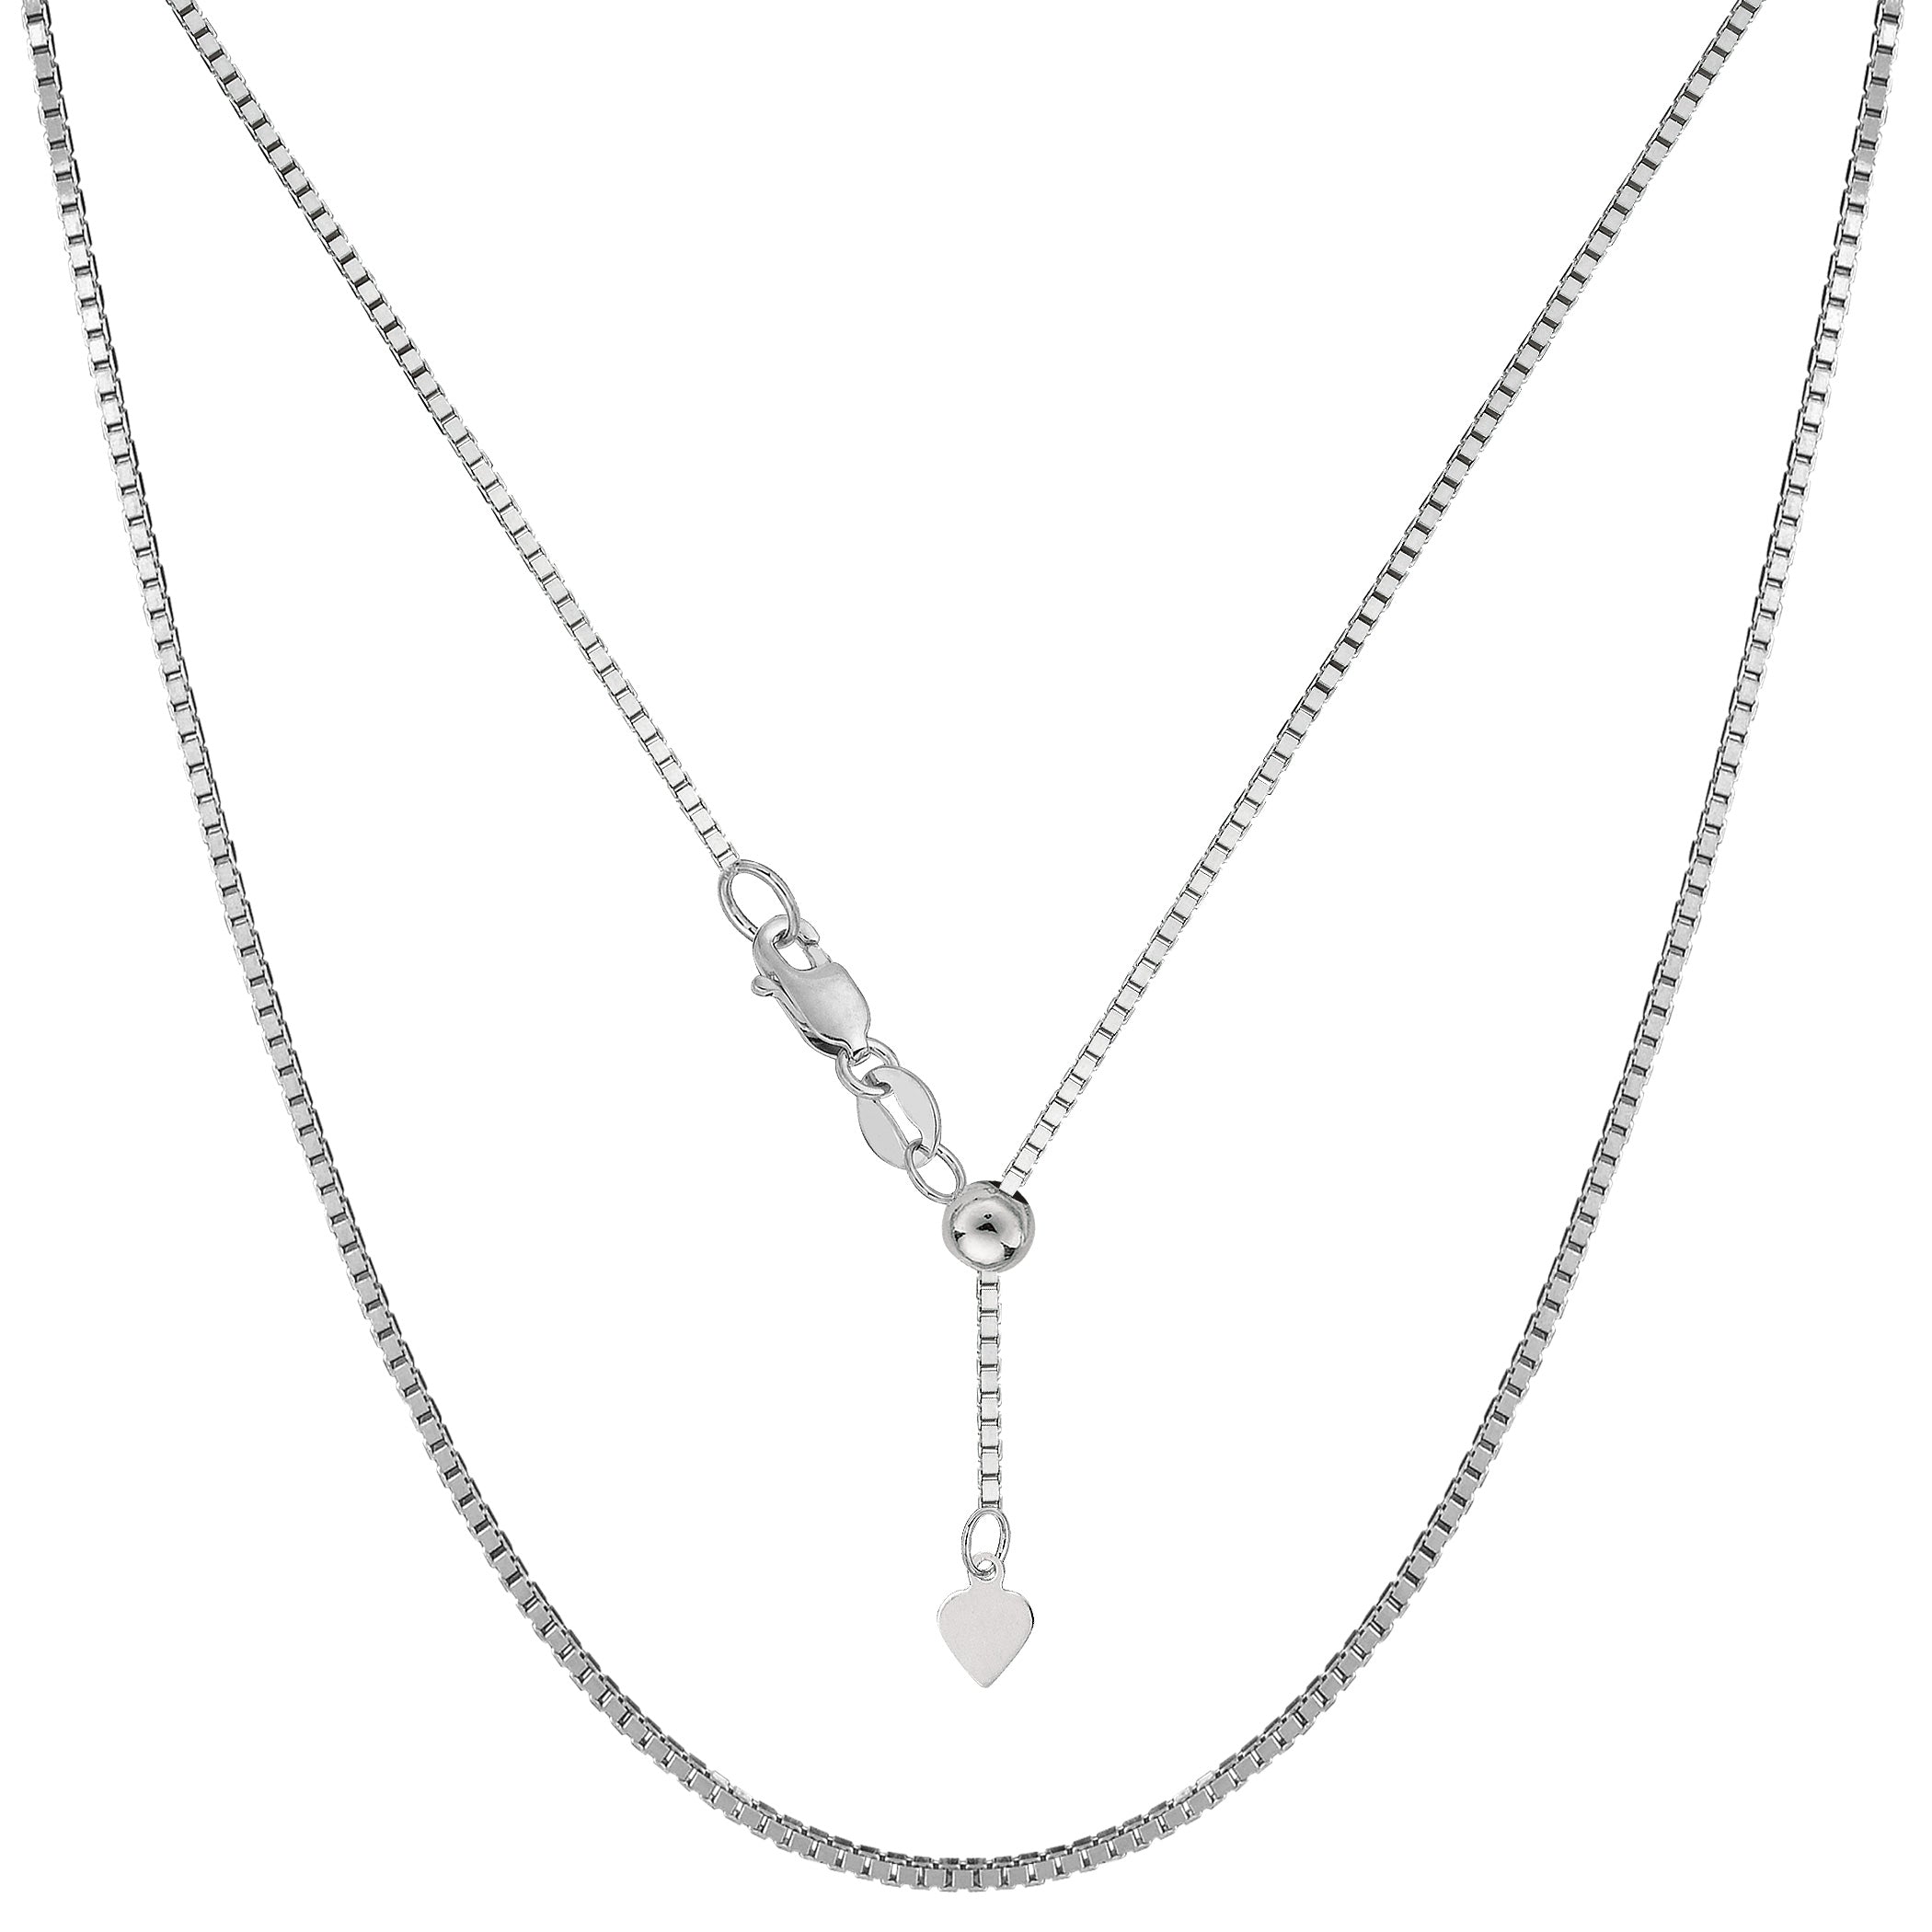 Sterling Silver Rhodium Plated Adjustable Box Chain Necklace, 1,2mm, 22" fine designer jewelry for men and women